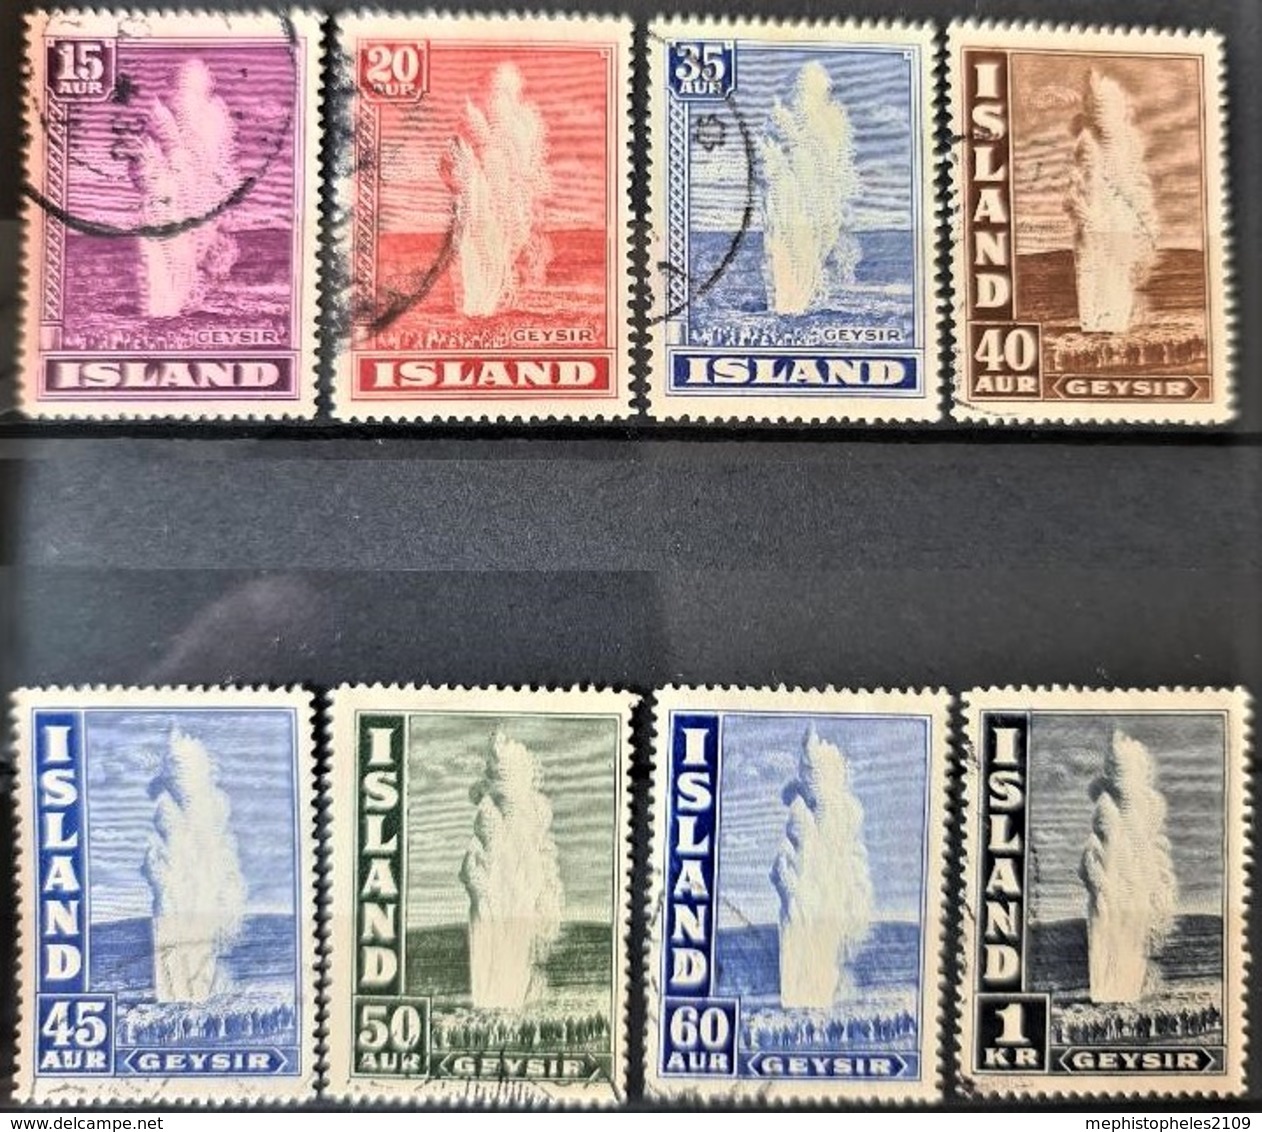 ICELAND - Canceled - Sc# 203, 204, 205, 206, 207, 208, 208A, 208B - Used Stamps